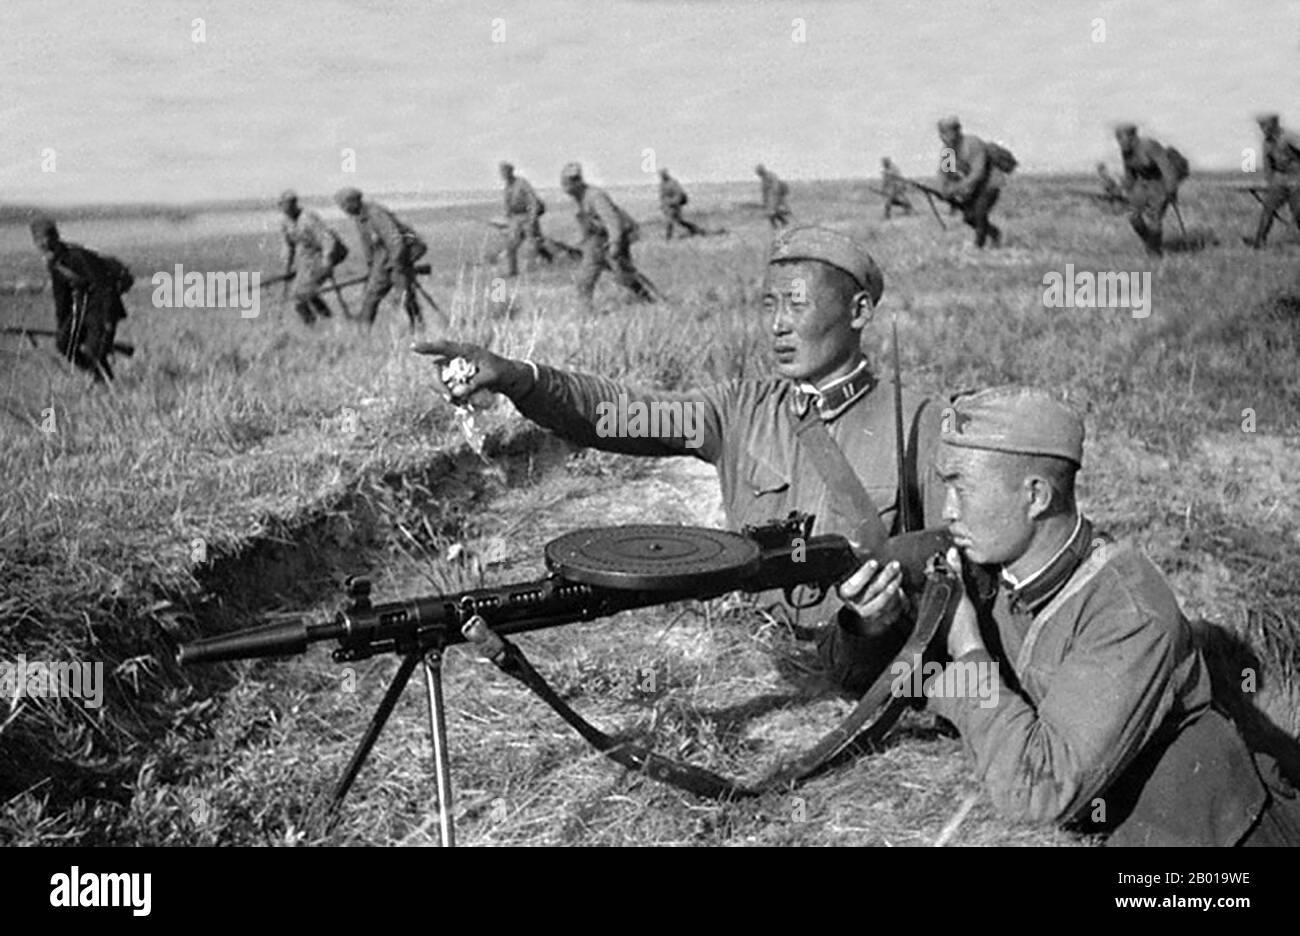 Mongolia: Soldiers of the Mongolian People's Revolutionary Army at Khalkhin Gol, 1939.  The Battles of Khalkhin Gol were the decisive engagements of the undeclared Soviet-Japanese Border War fought between the Soviet Union, Mongolia and Japan in 1939. They were named after the river Khalkhin Gol, which passes through the battlefield. In Japan, the decisive battle of the conflict is known as the Nomonhan Incident (Nomonhan Jiken) after a nearby village, and was a total defeat for their army. Stock Photo